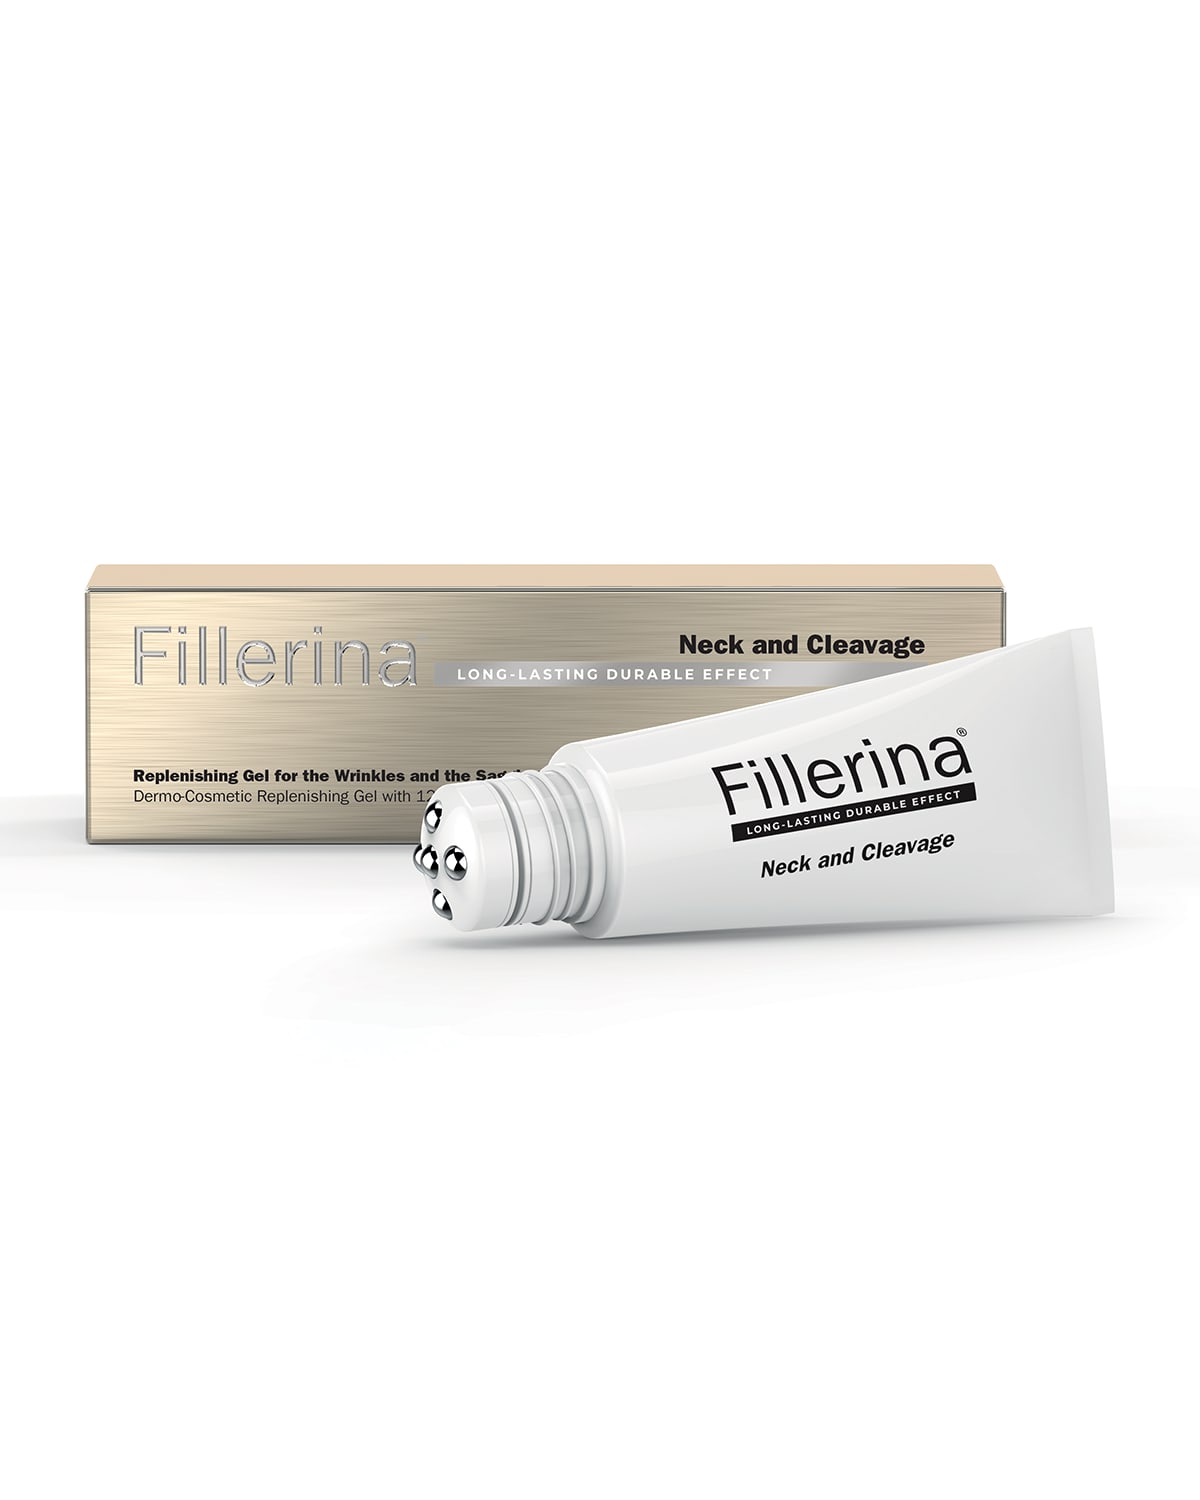 Fillerina Long Lasting Neck and Cleavage Gel G5, 1 oz.